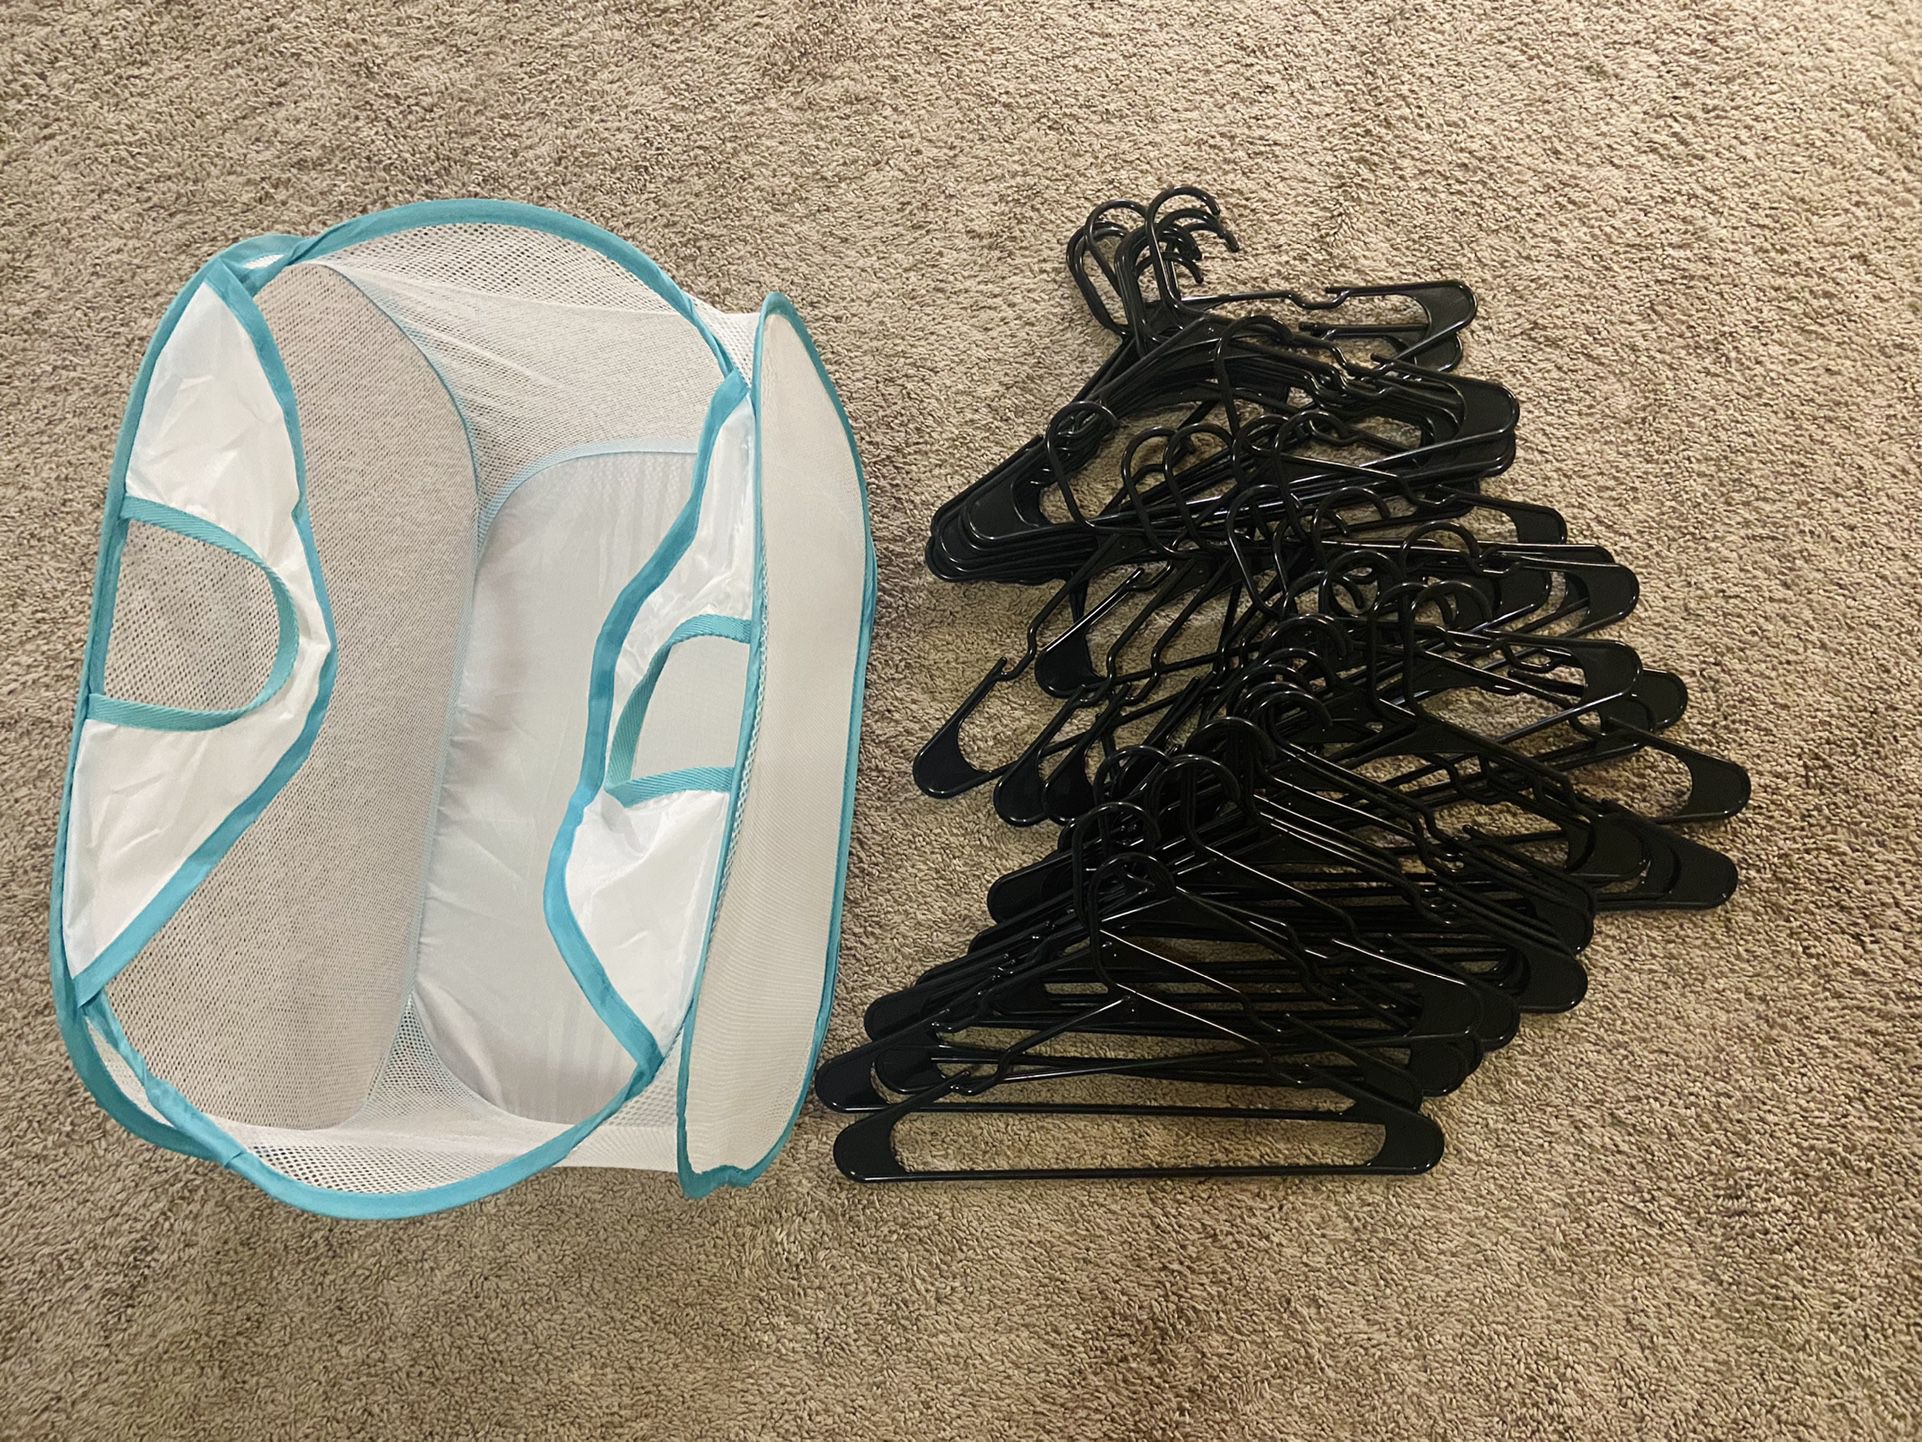 Laundry bag and hangers